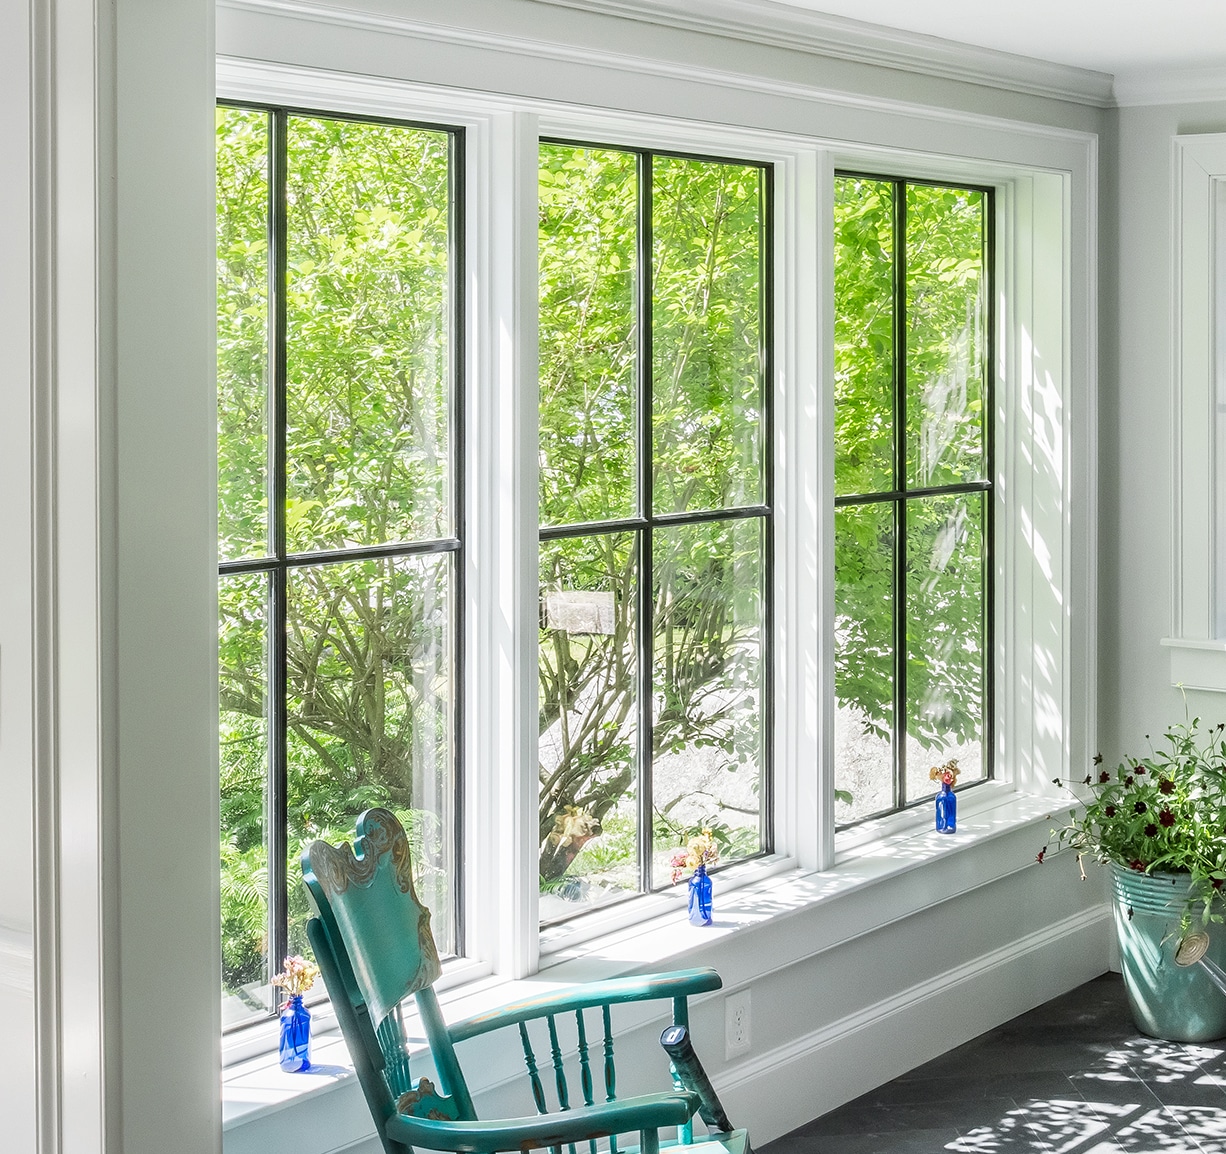 Popular Window Types For Bringing More Natural Light To Your Space